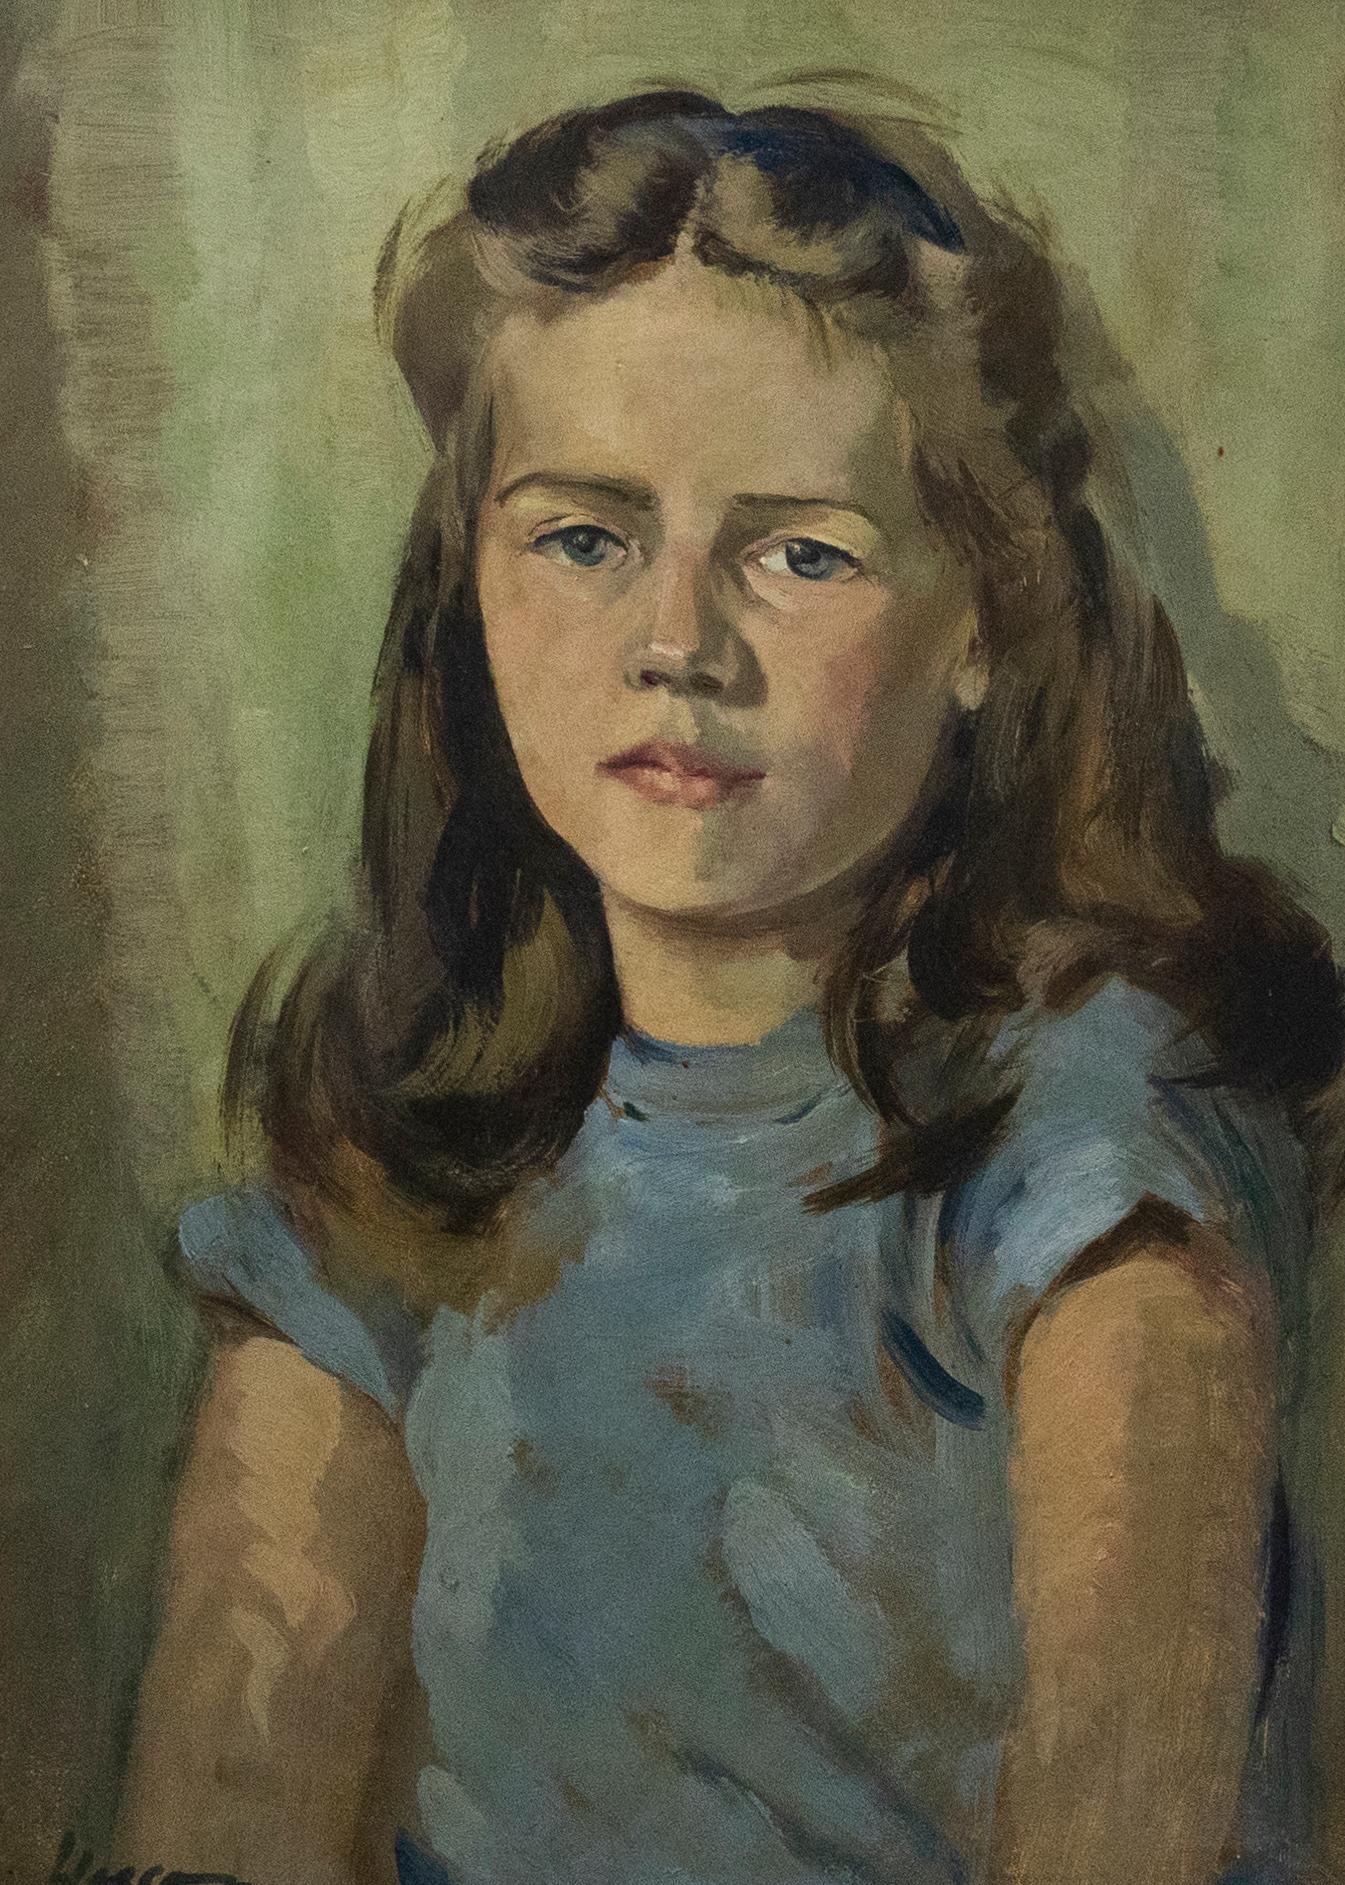 An accomplished oil portrait of Sally Jean McGowan by the listed British Painter Edward Wesson. Here Wesson captures young Sally in gestural brush strokes, giving the composition a wonderful loose and relaxed feeling, much like the sitter. The